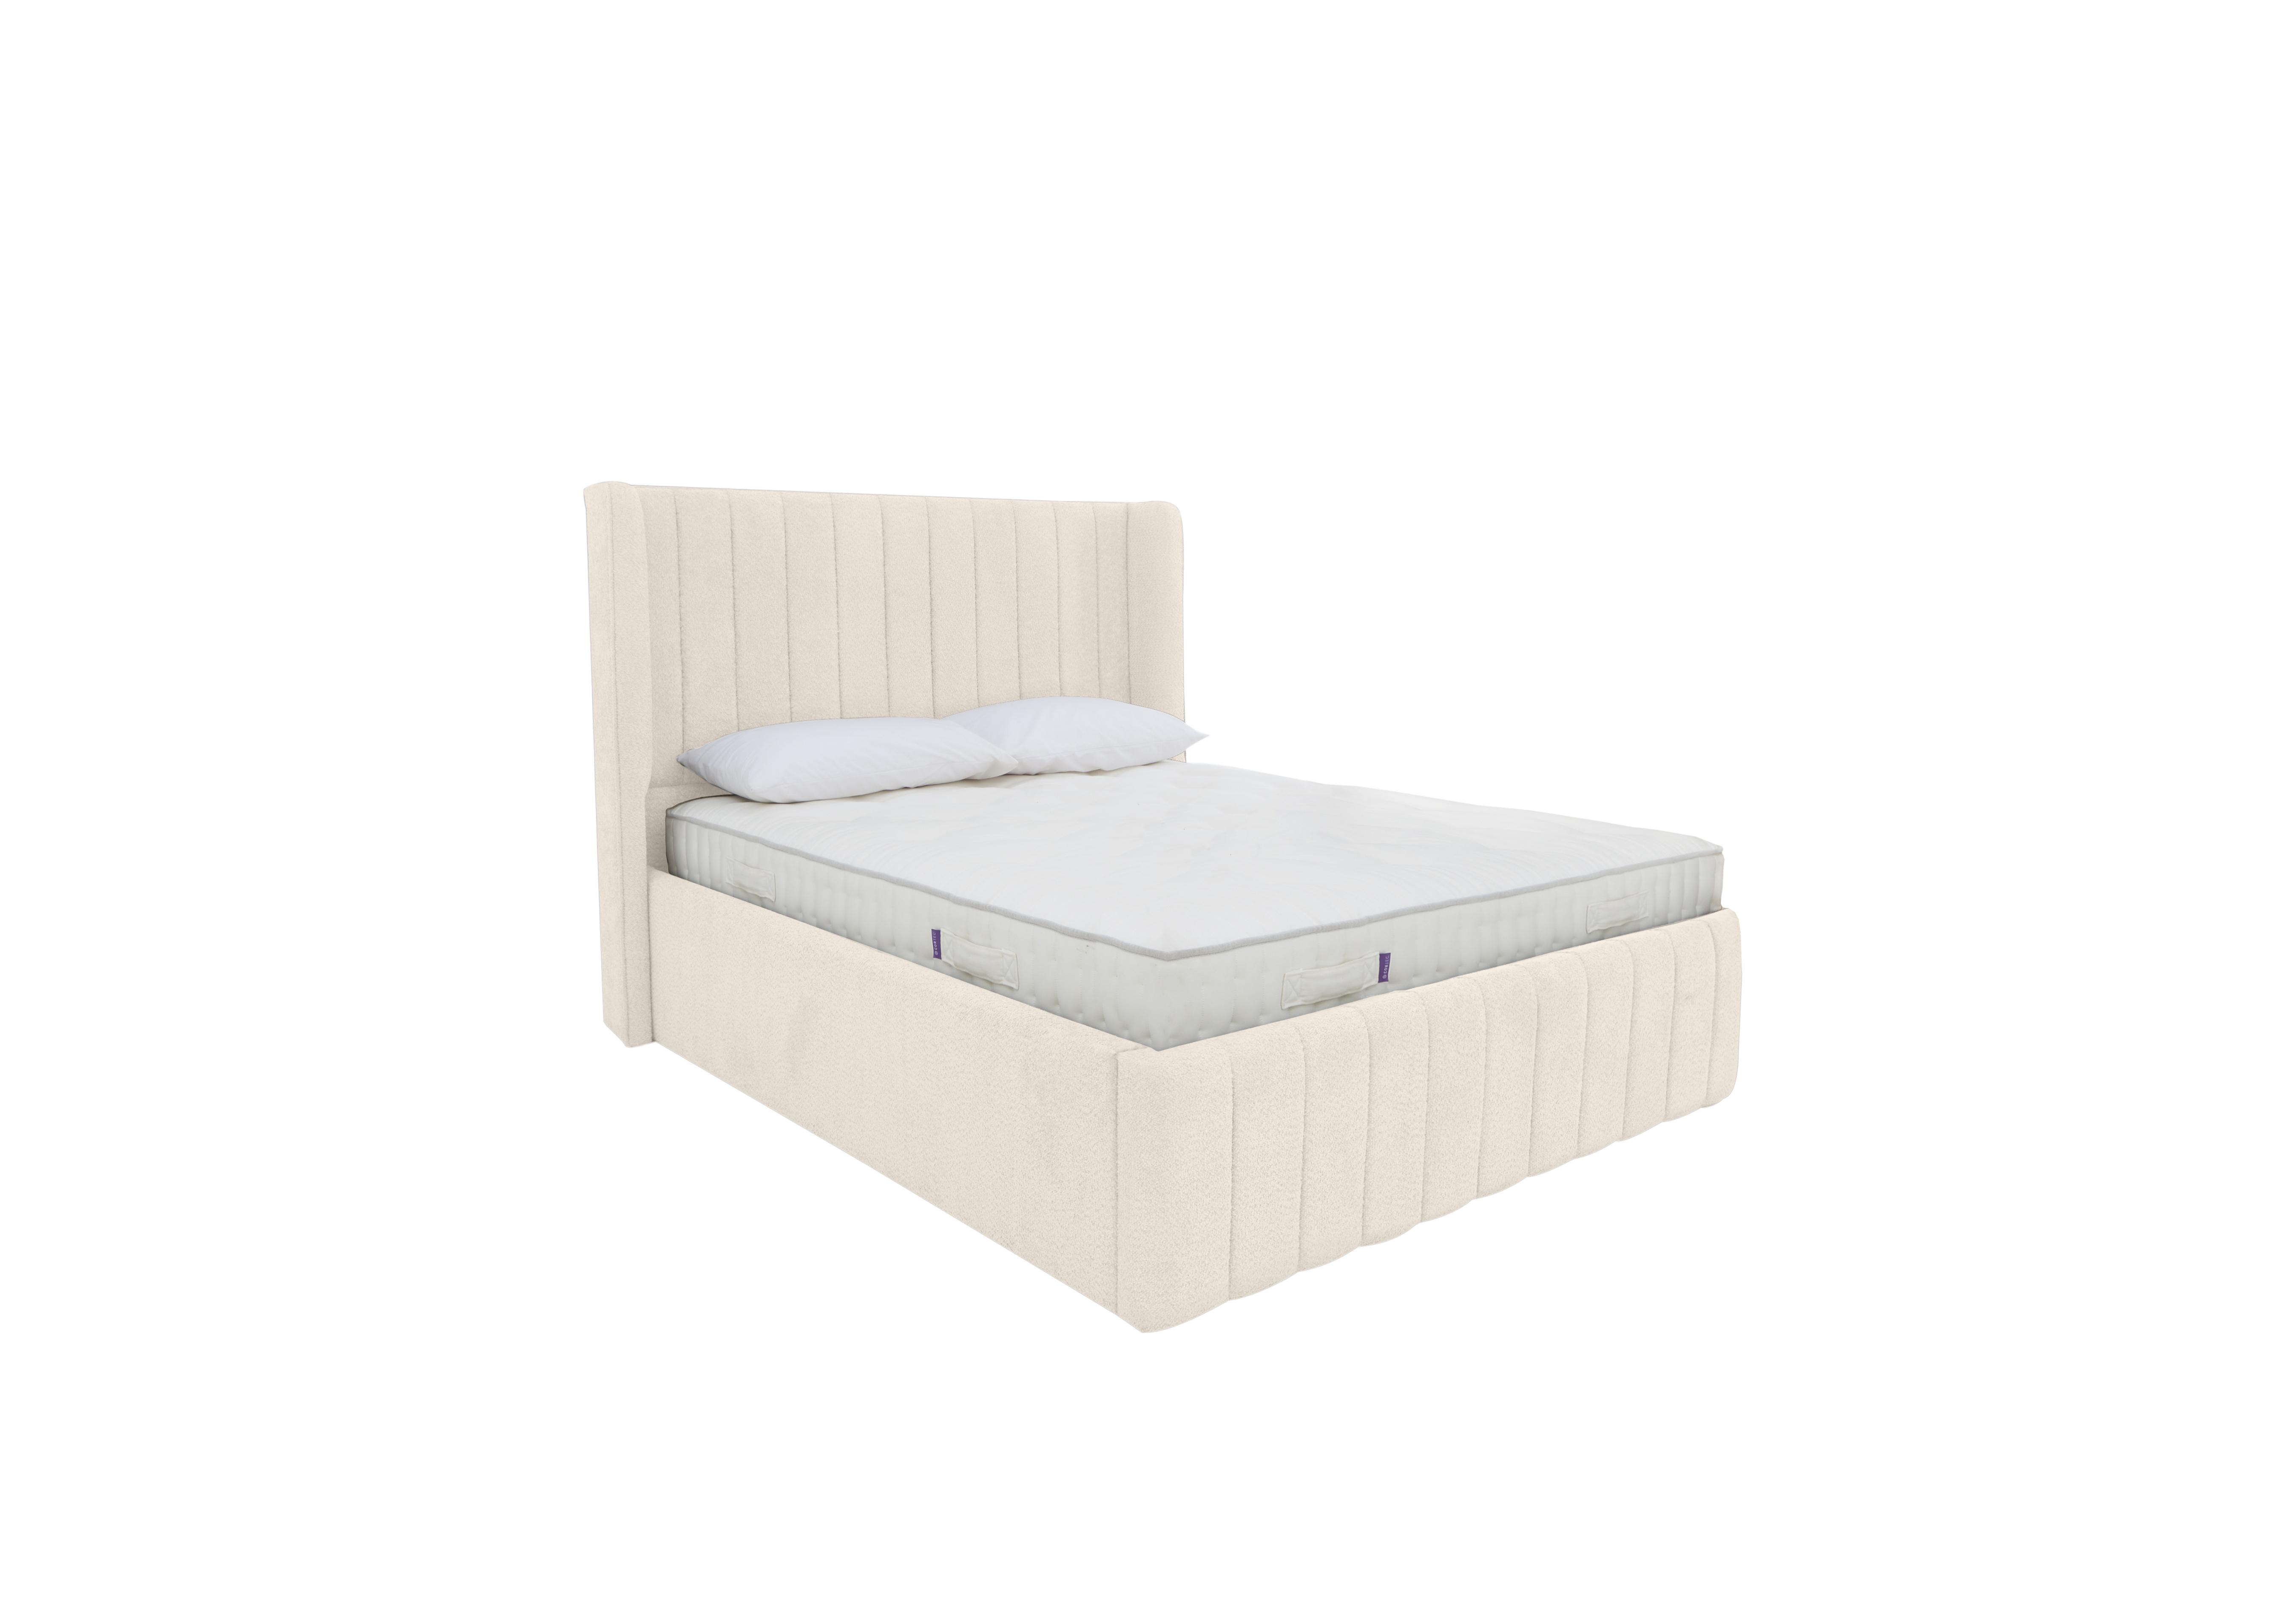 Eira Low Foot End Ottoman Bed Frame in Comfy Oat on Furniture Village